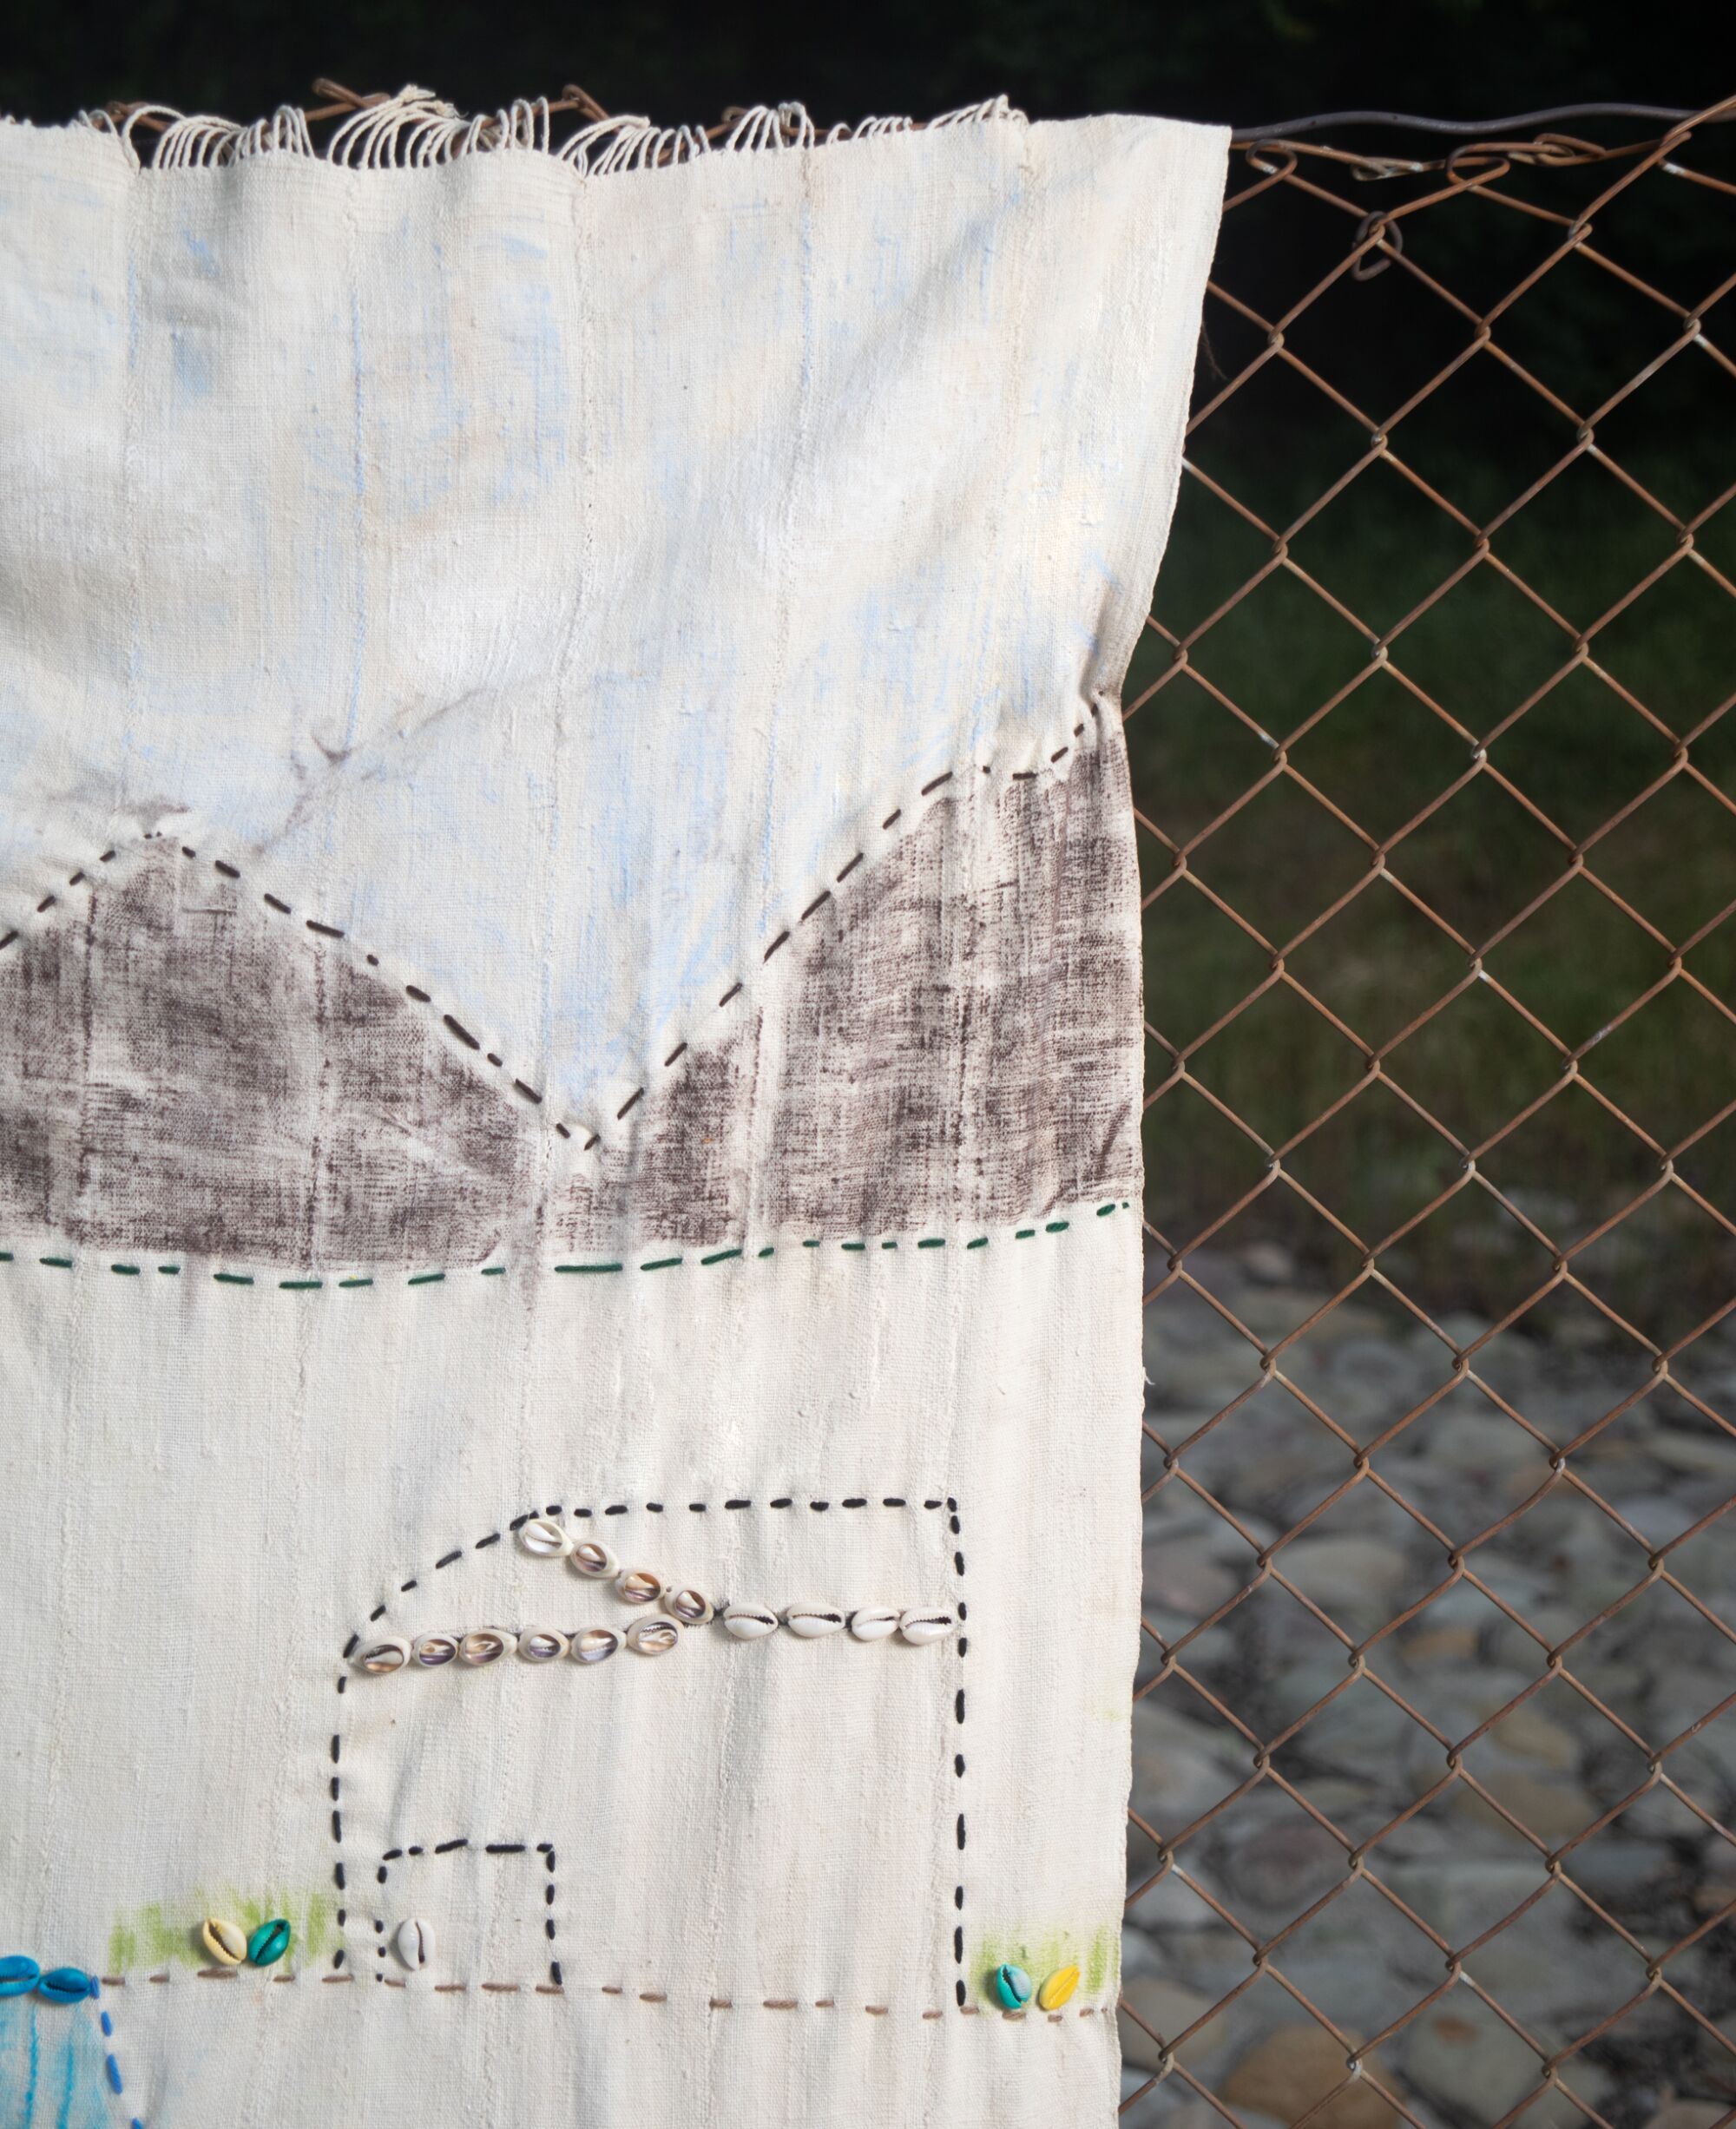 A detail of a textile showing a house and mountains in the distance.